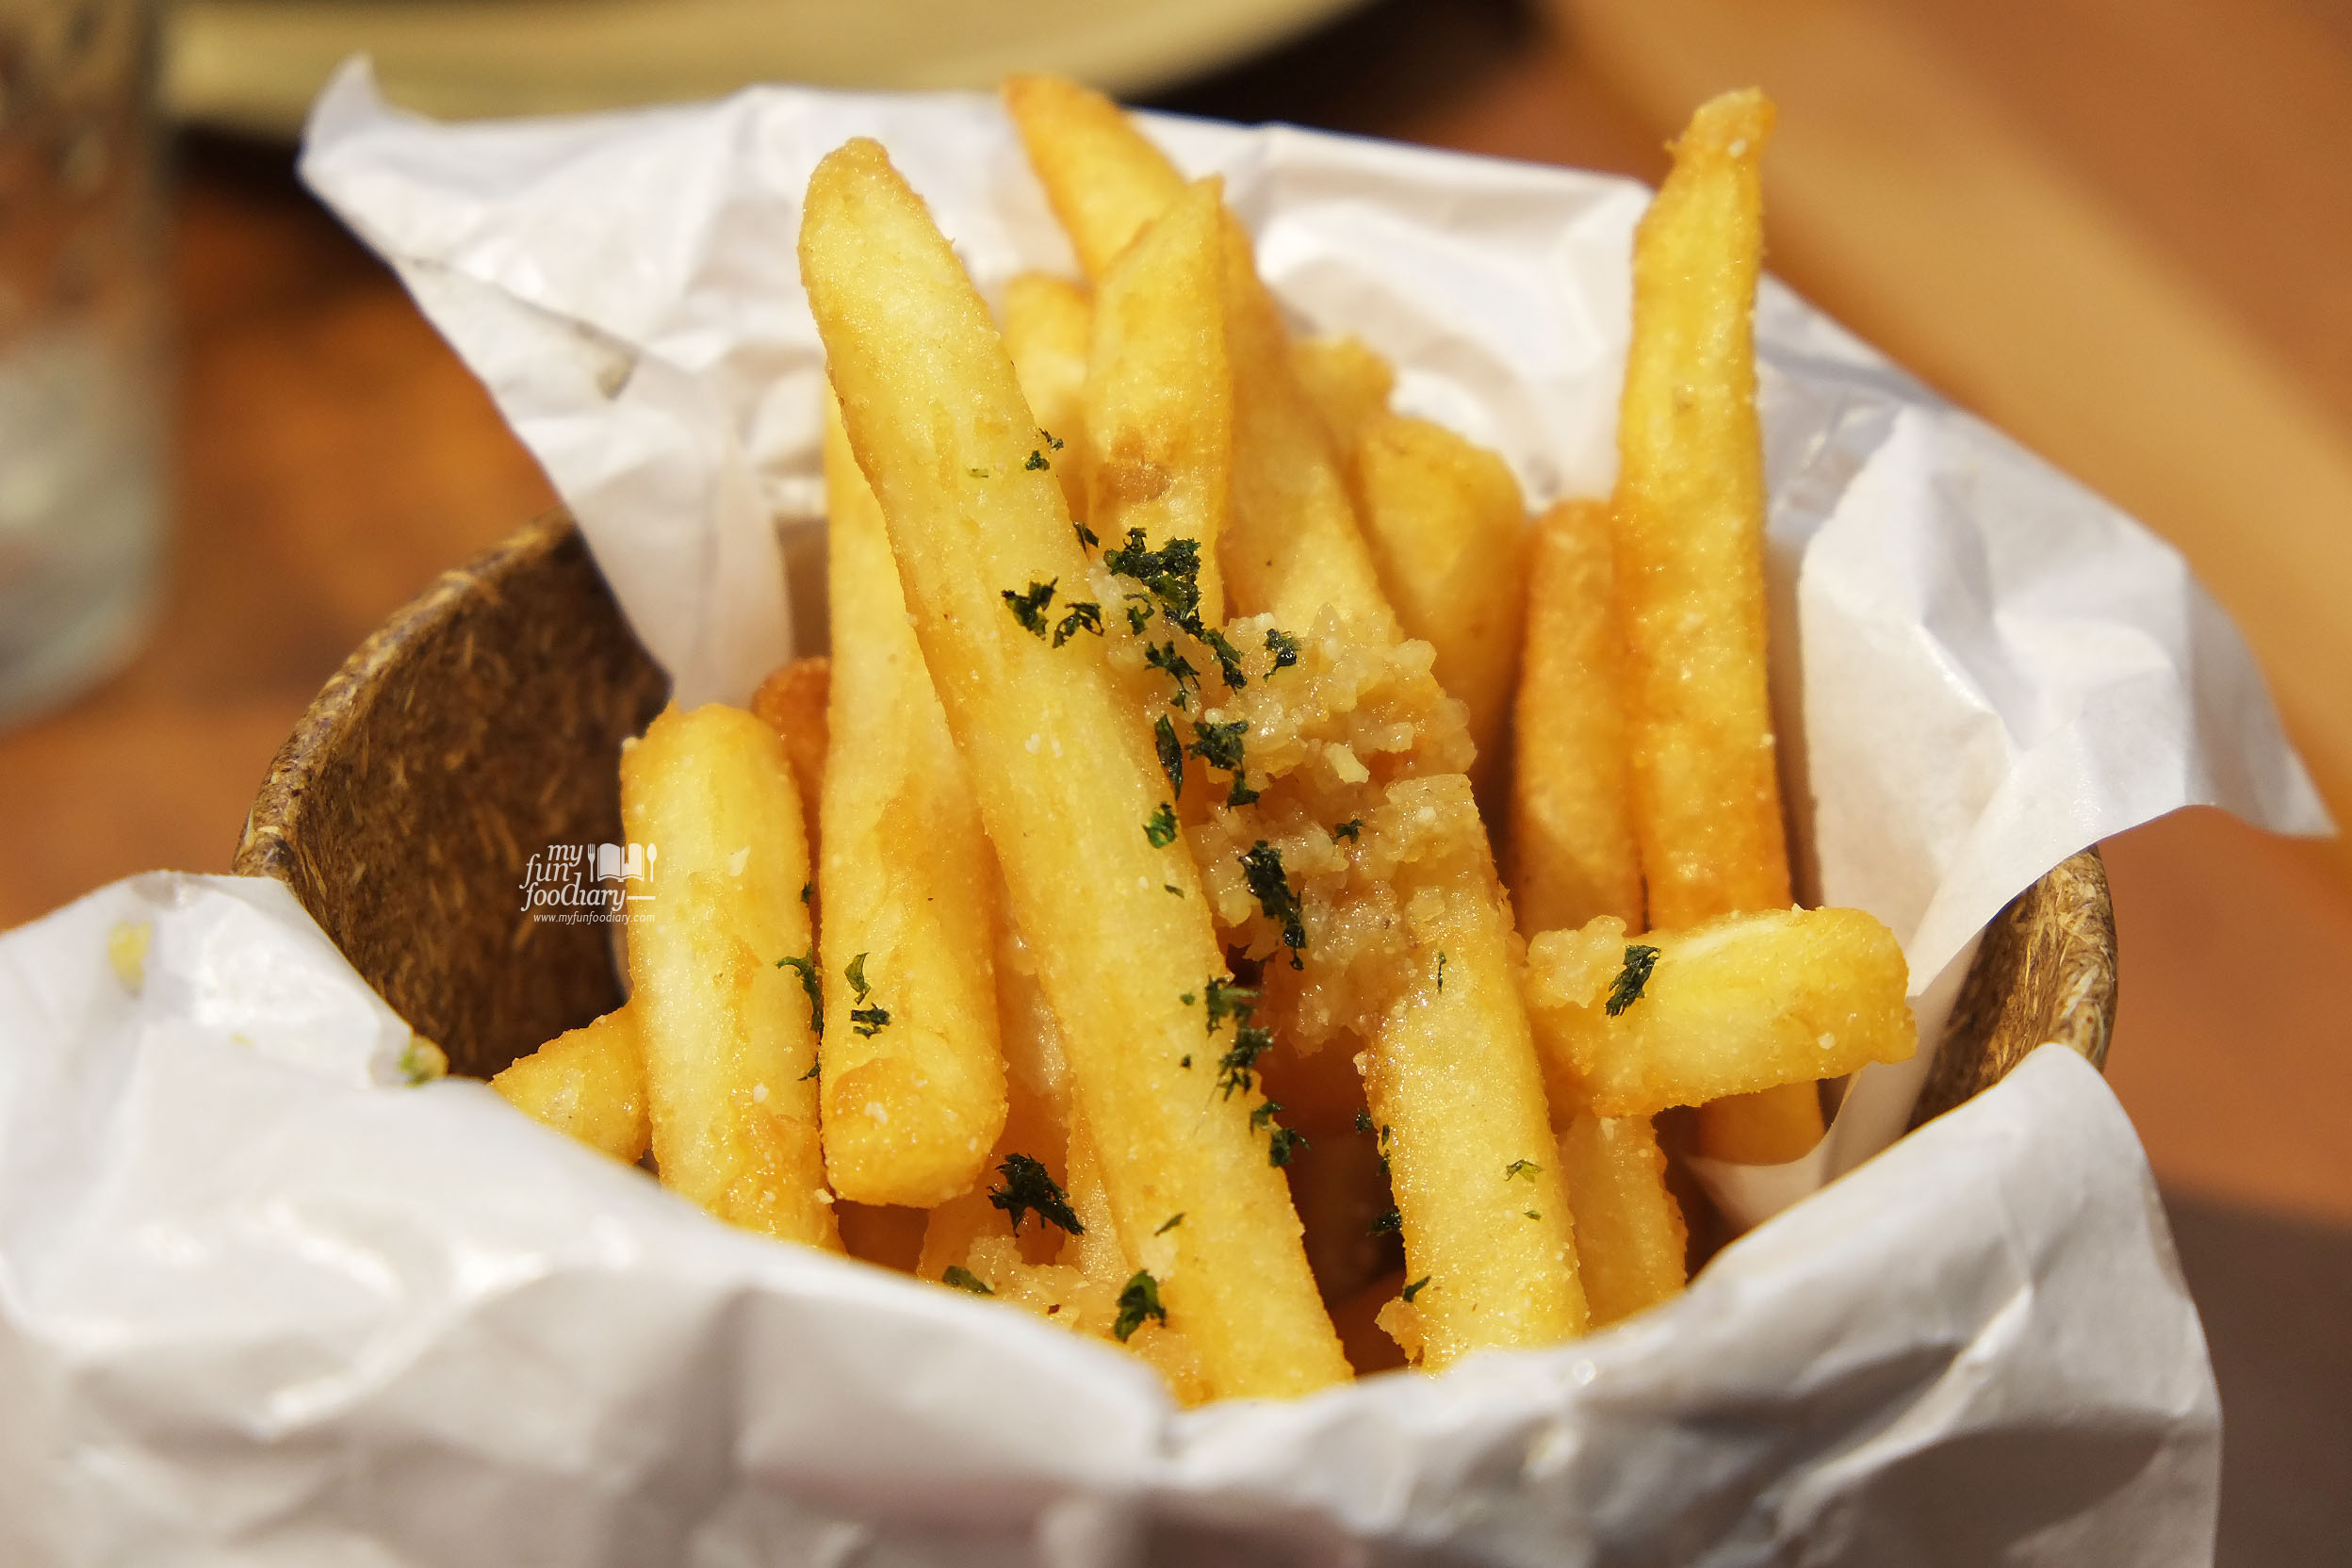 Provencale French Fries at Dill Gourmet by Myfunfoodiary